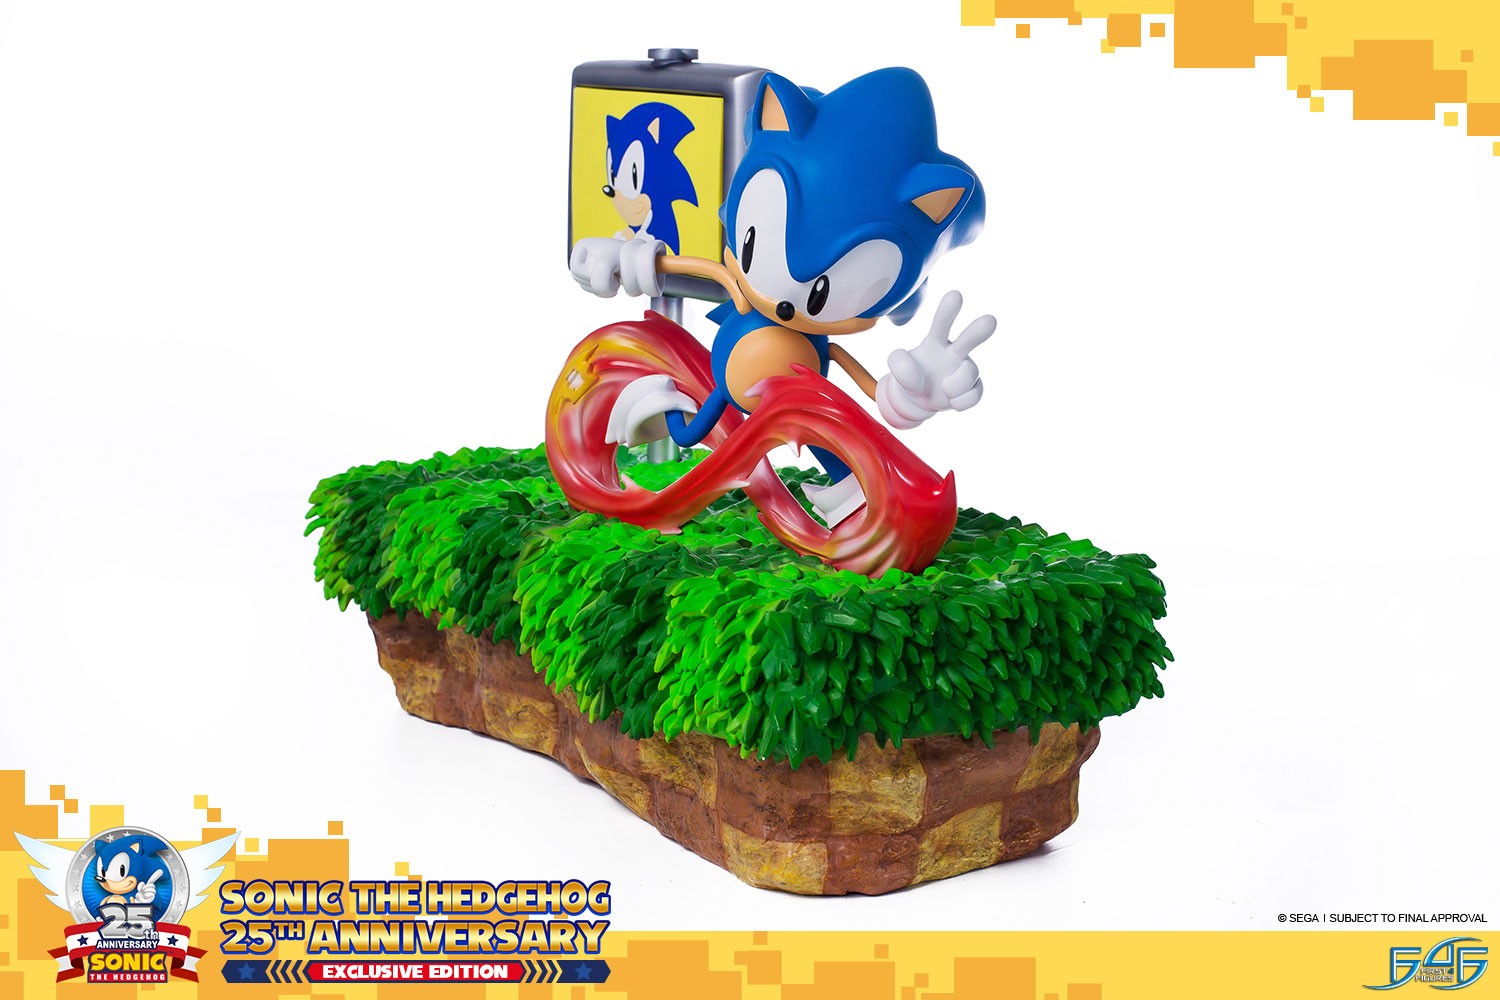 Sonic The Hedgehog 25th Anniversary (Exclusive)